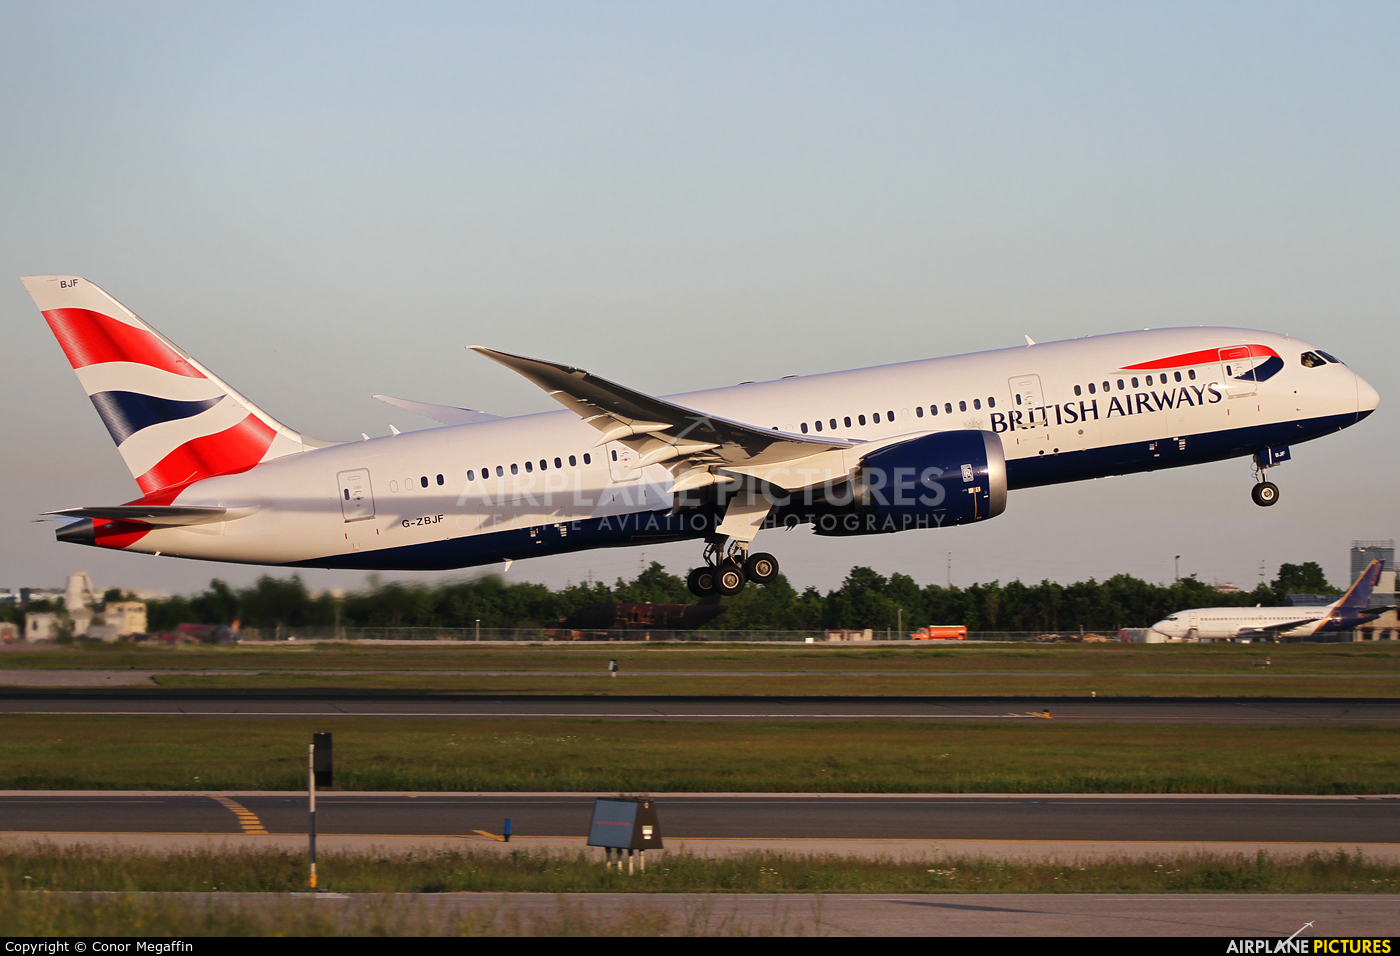 British Airways G-ZBJF aircraft at Toronto - Pearson Intl, ON